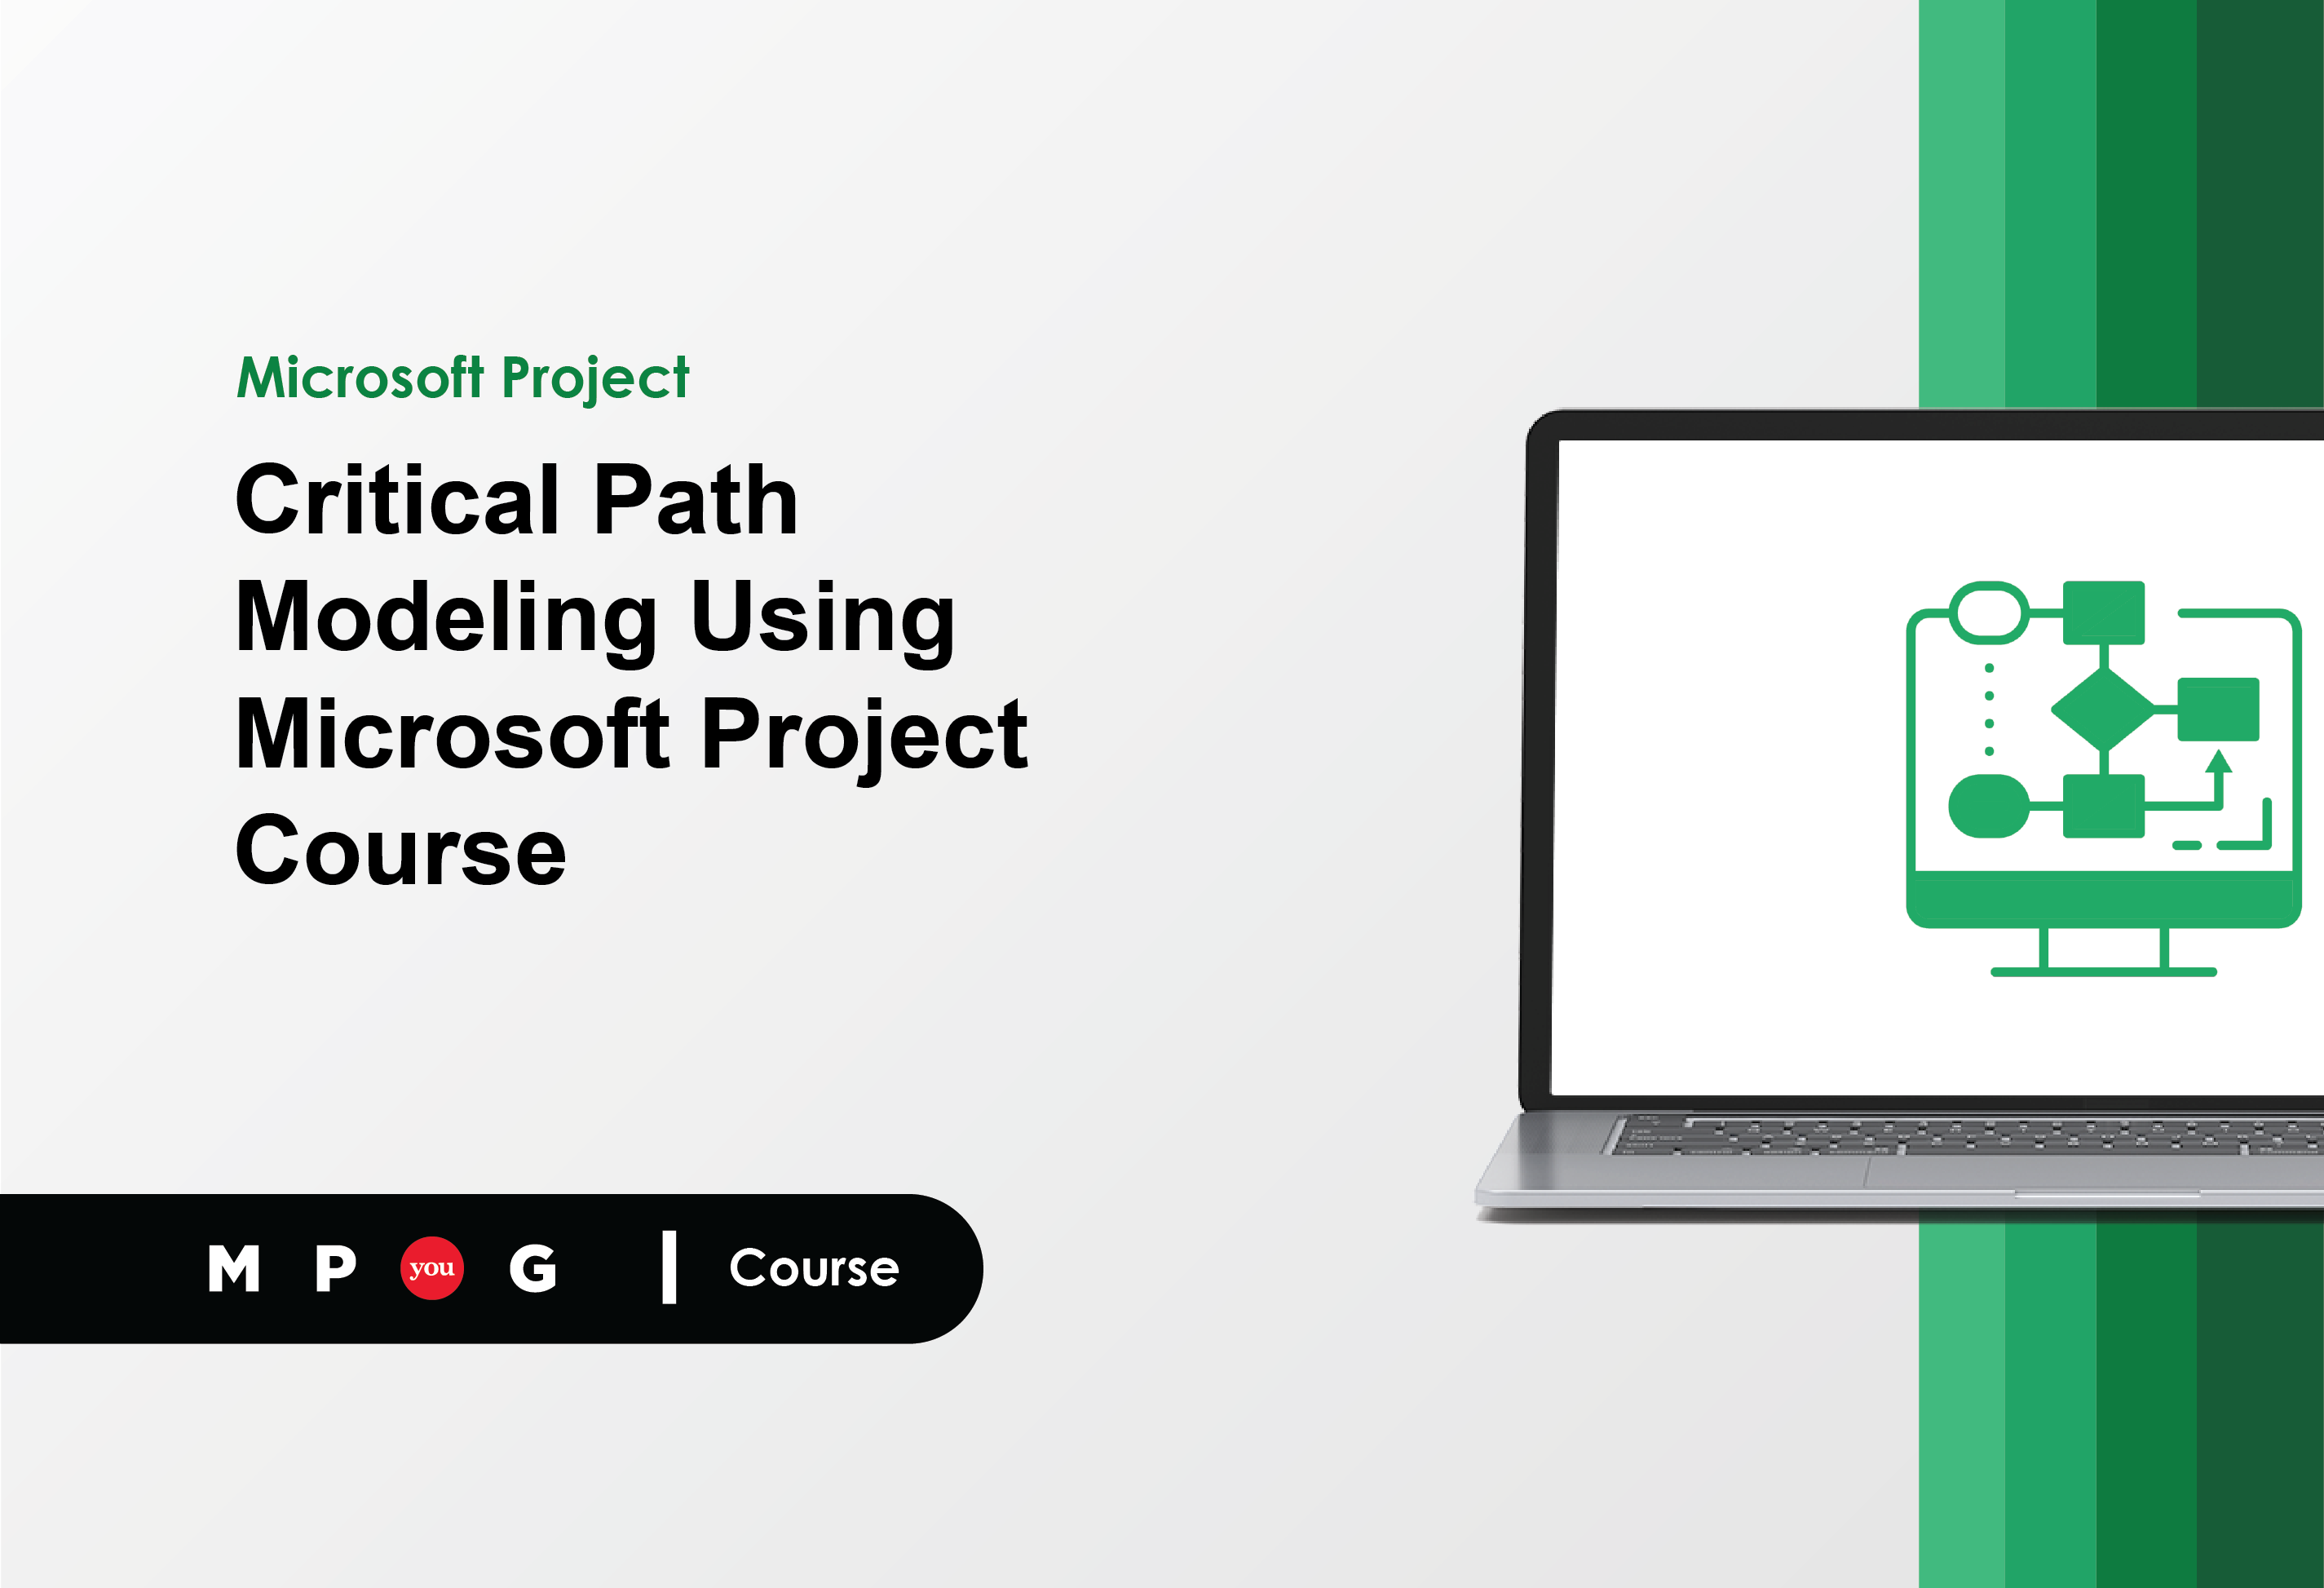 Critical Path Modeling Using Microsoft Project Course